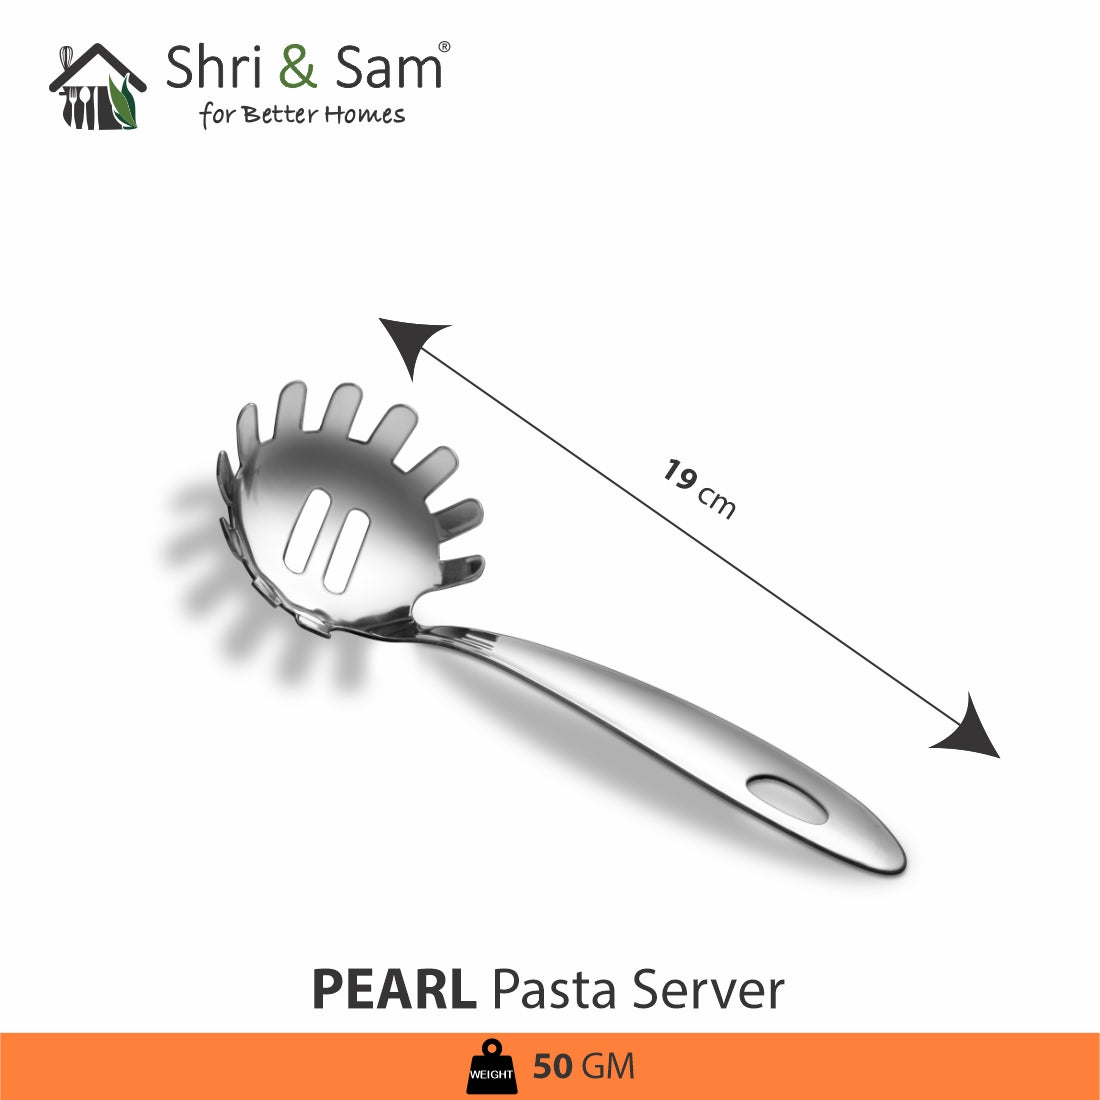 Stainless Steel Pasta Server Pearl